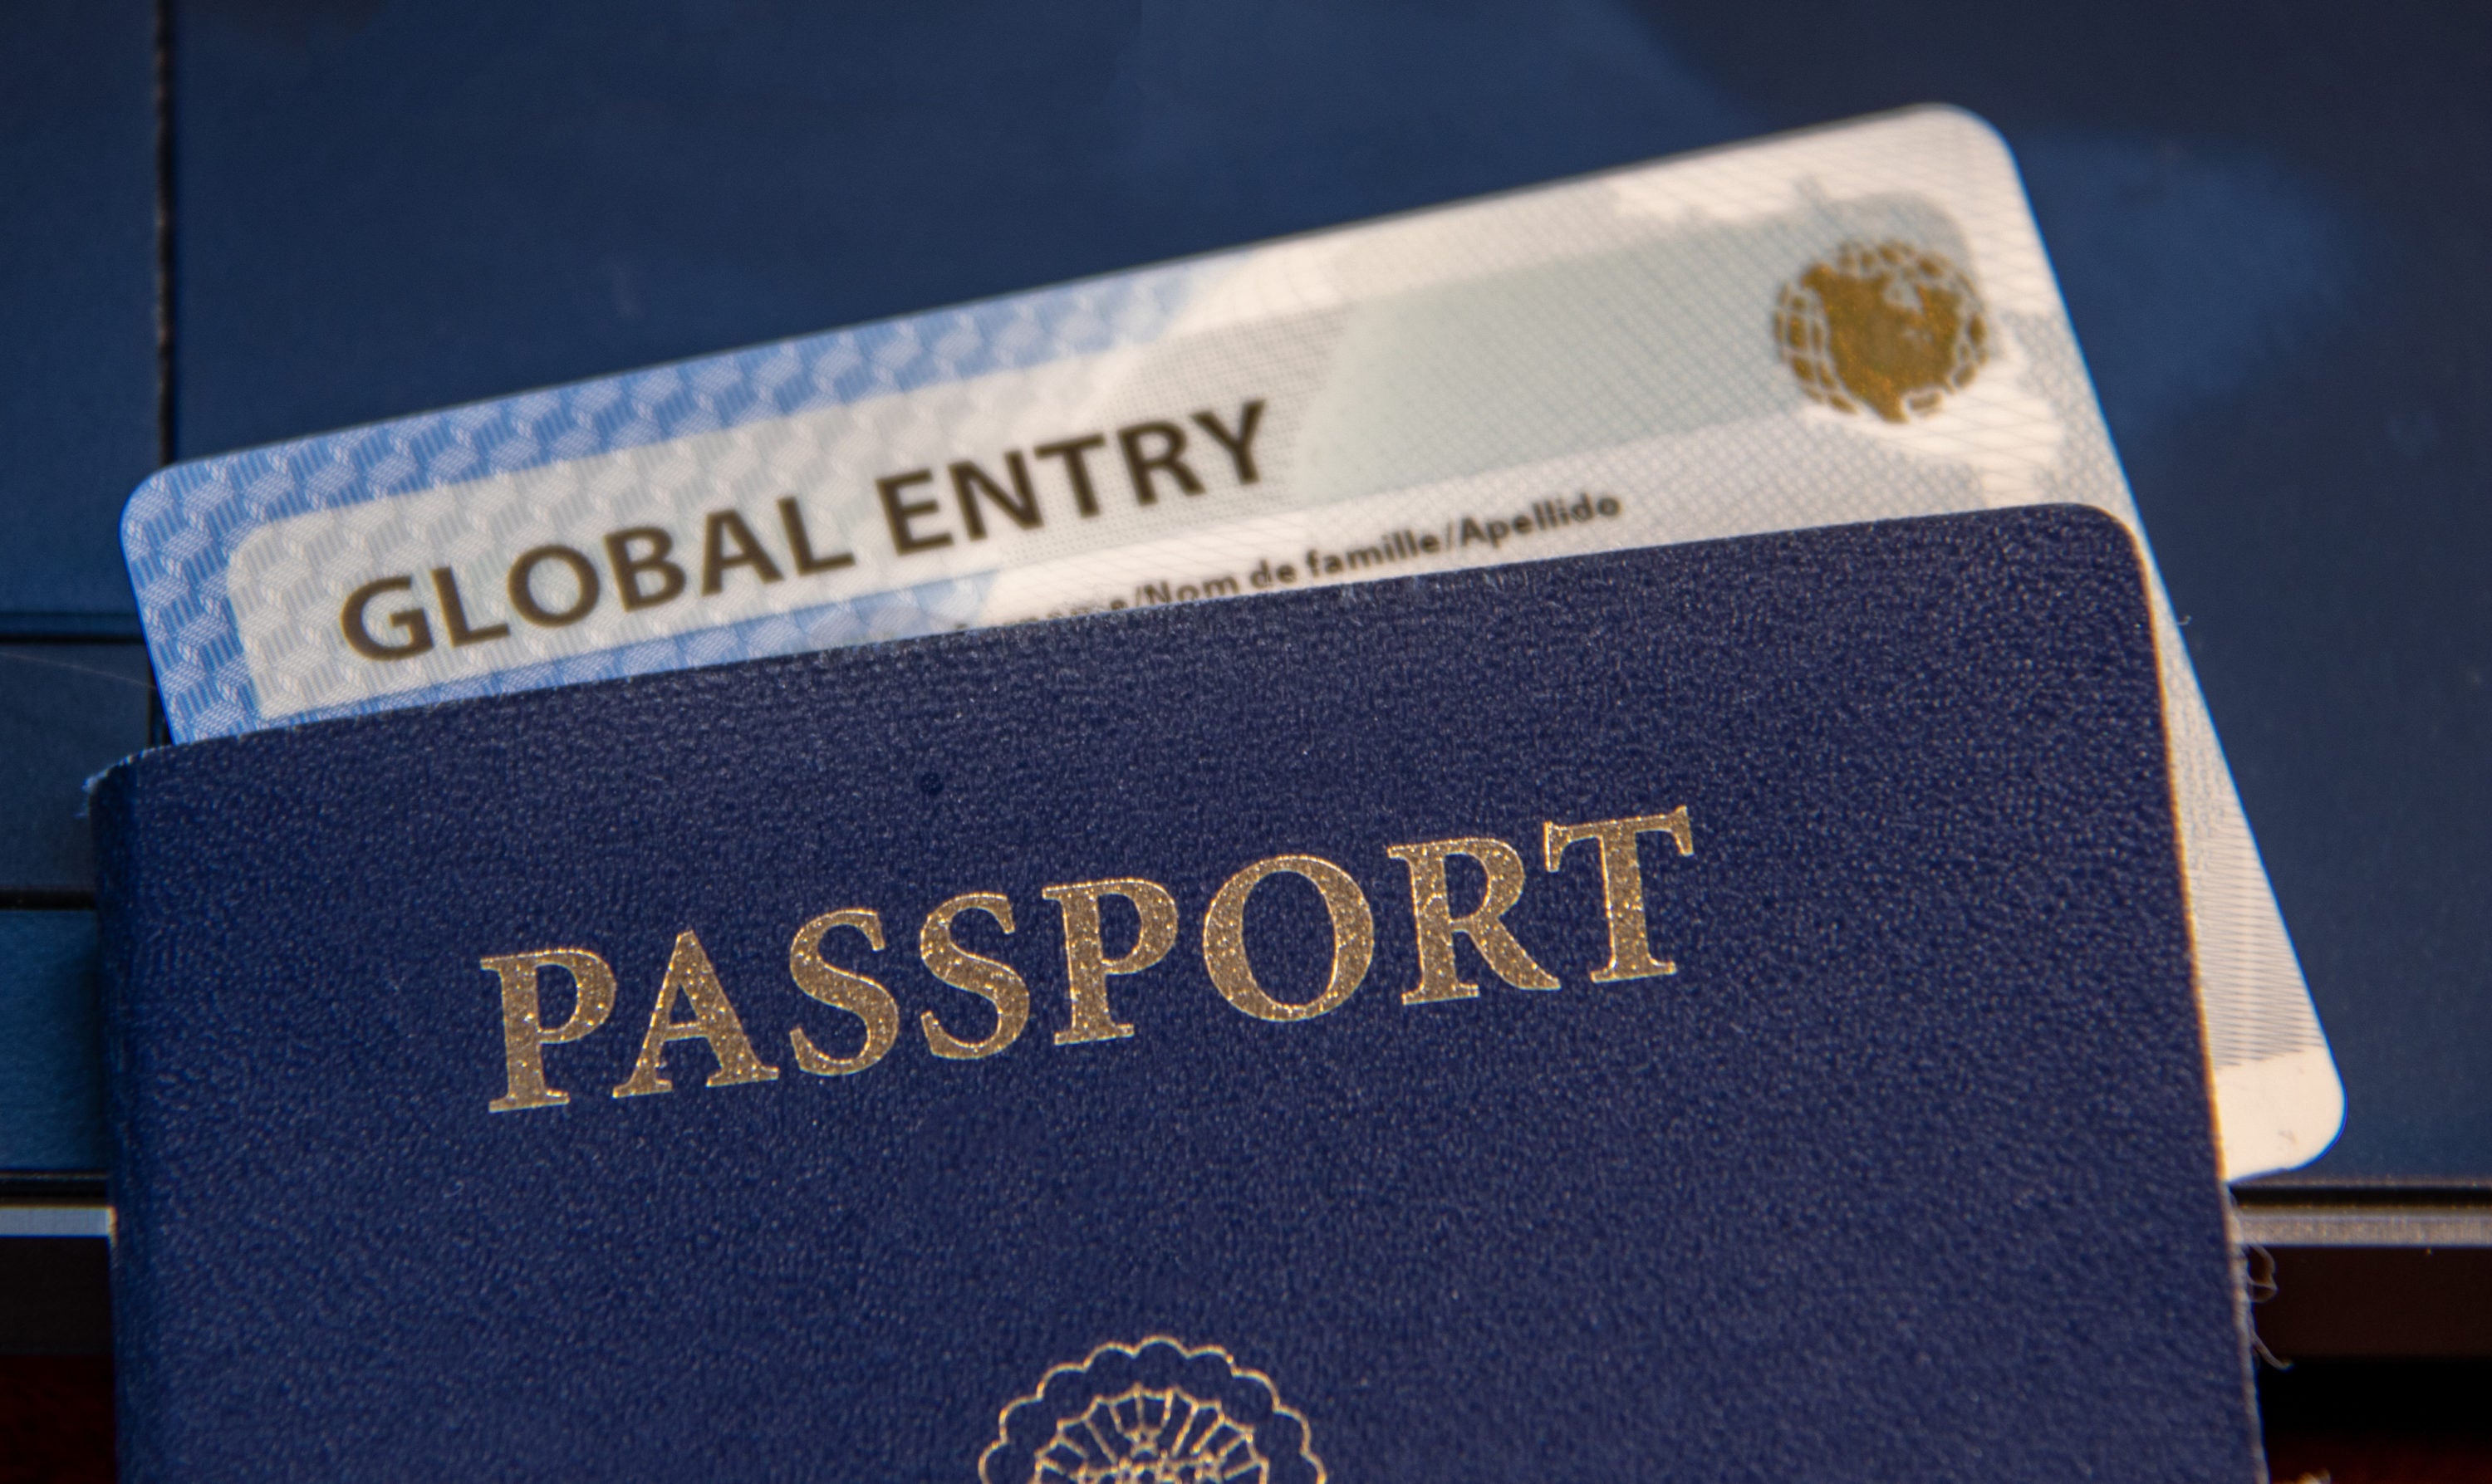 Global Entry card and passport